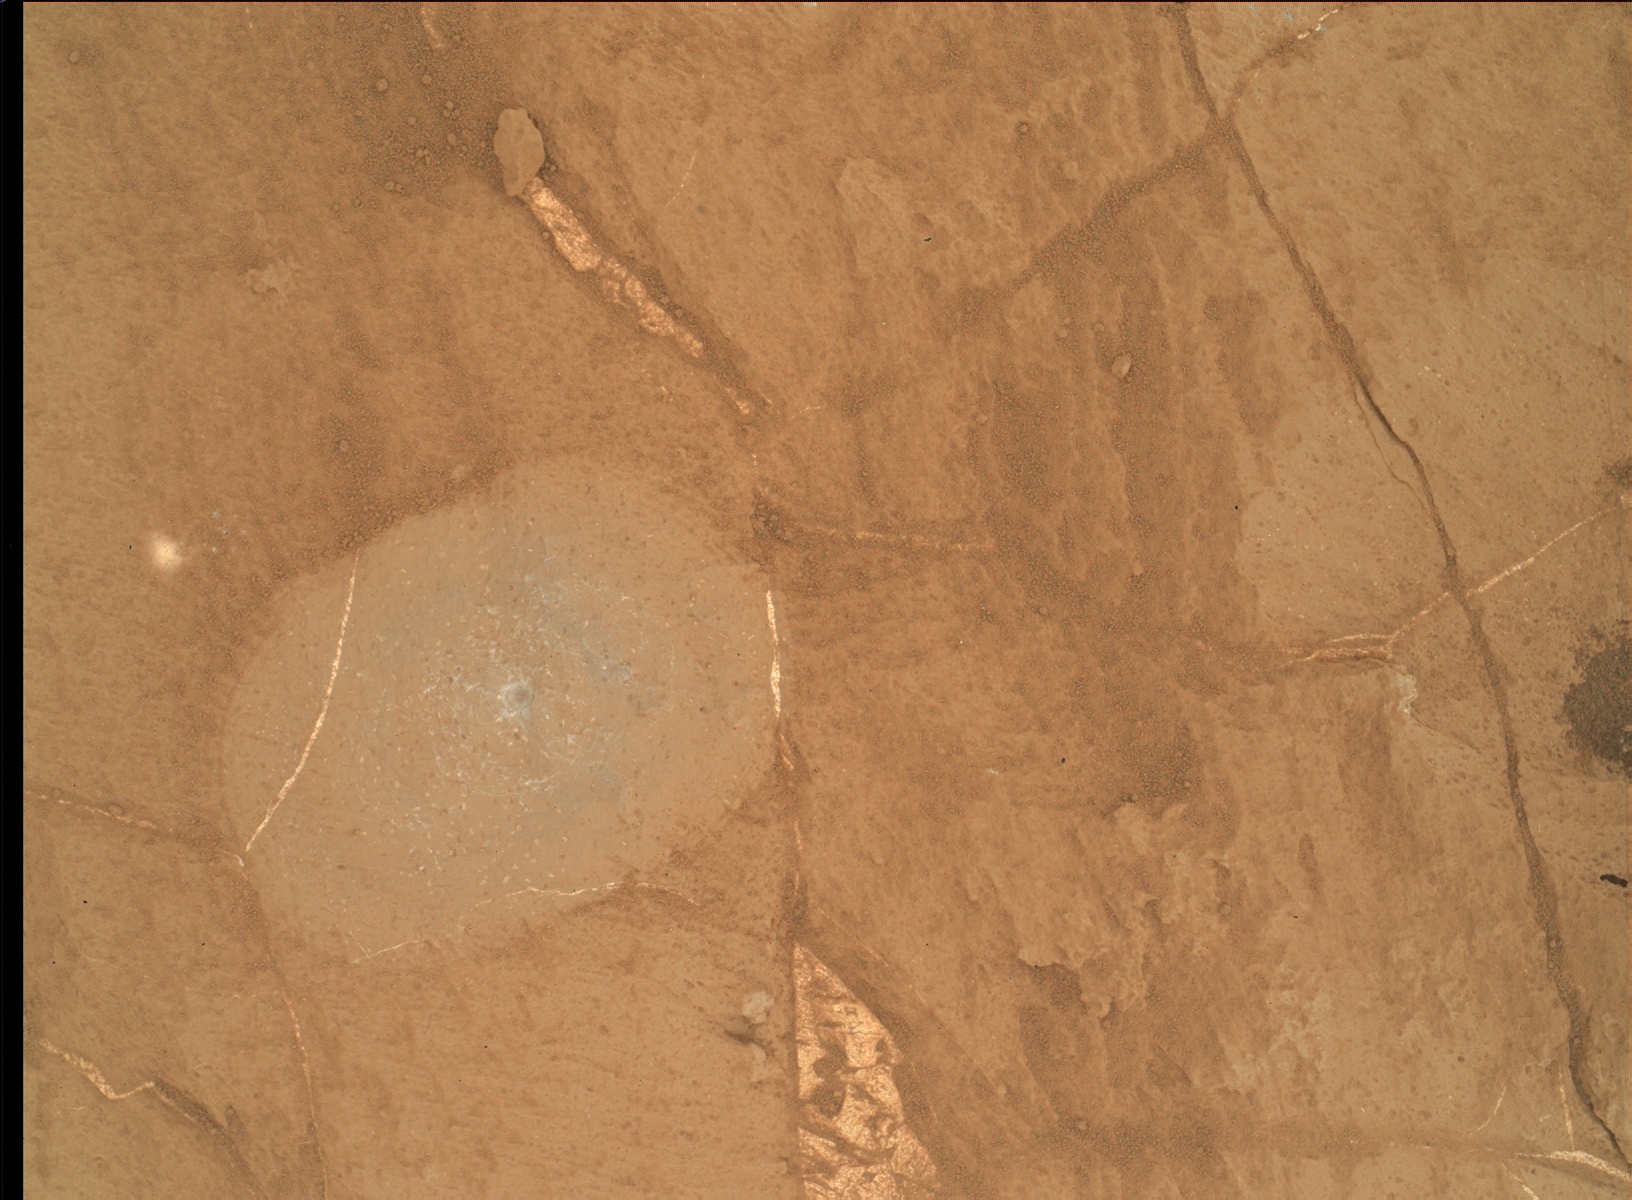 Nasa's Mars rover Curiosity acquired this image using its Mars Hand Lens Imager (MAHLI) on Sol 1059